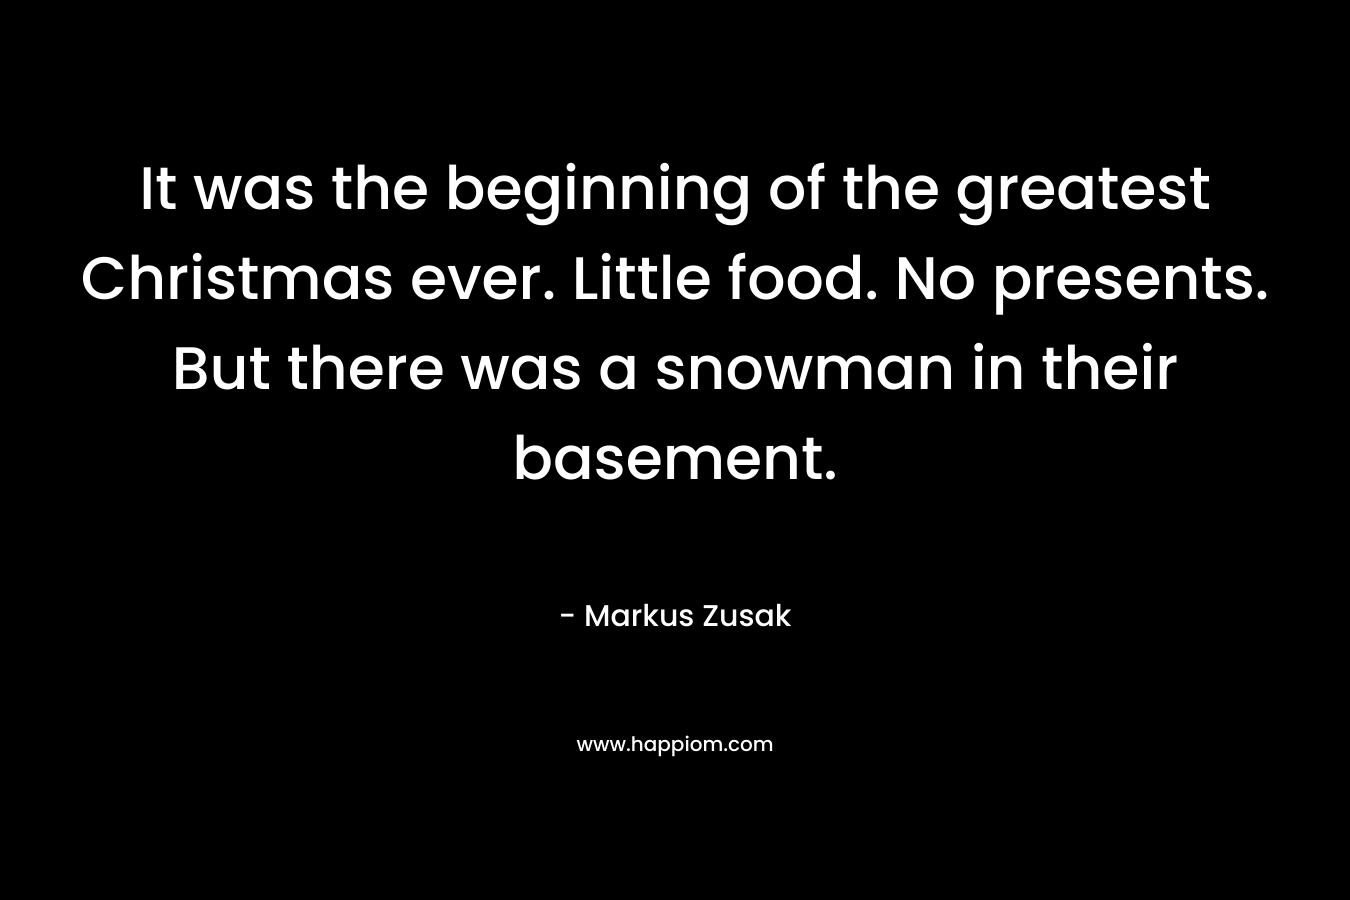 It was the beginning of the greatest Christmas ever. Little food. No presents. But there was a snowman in their basement.